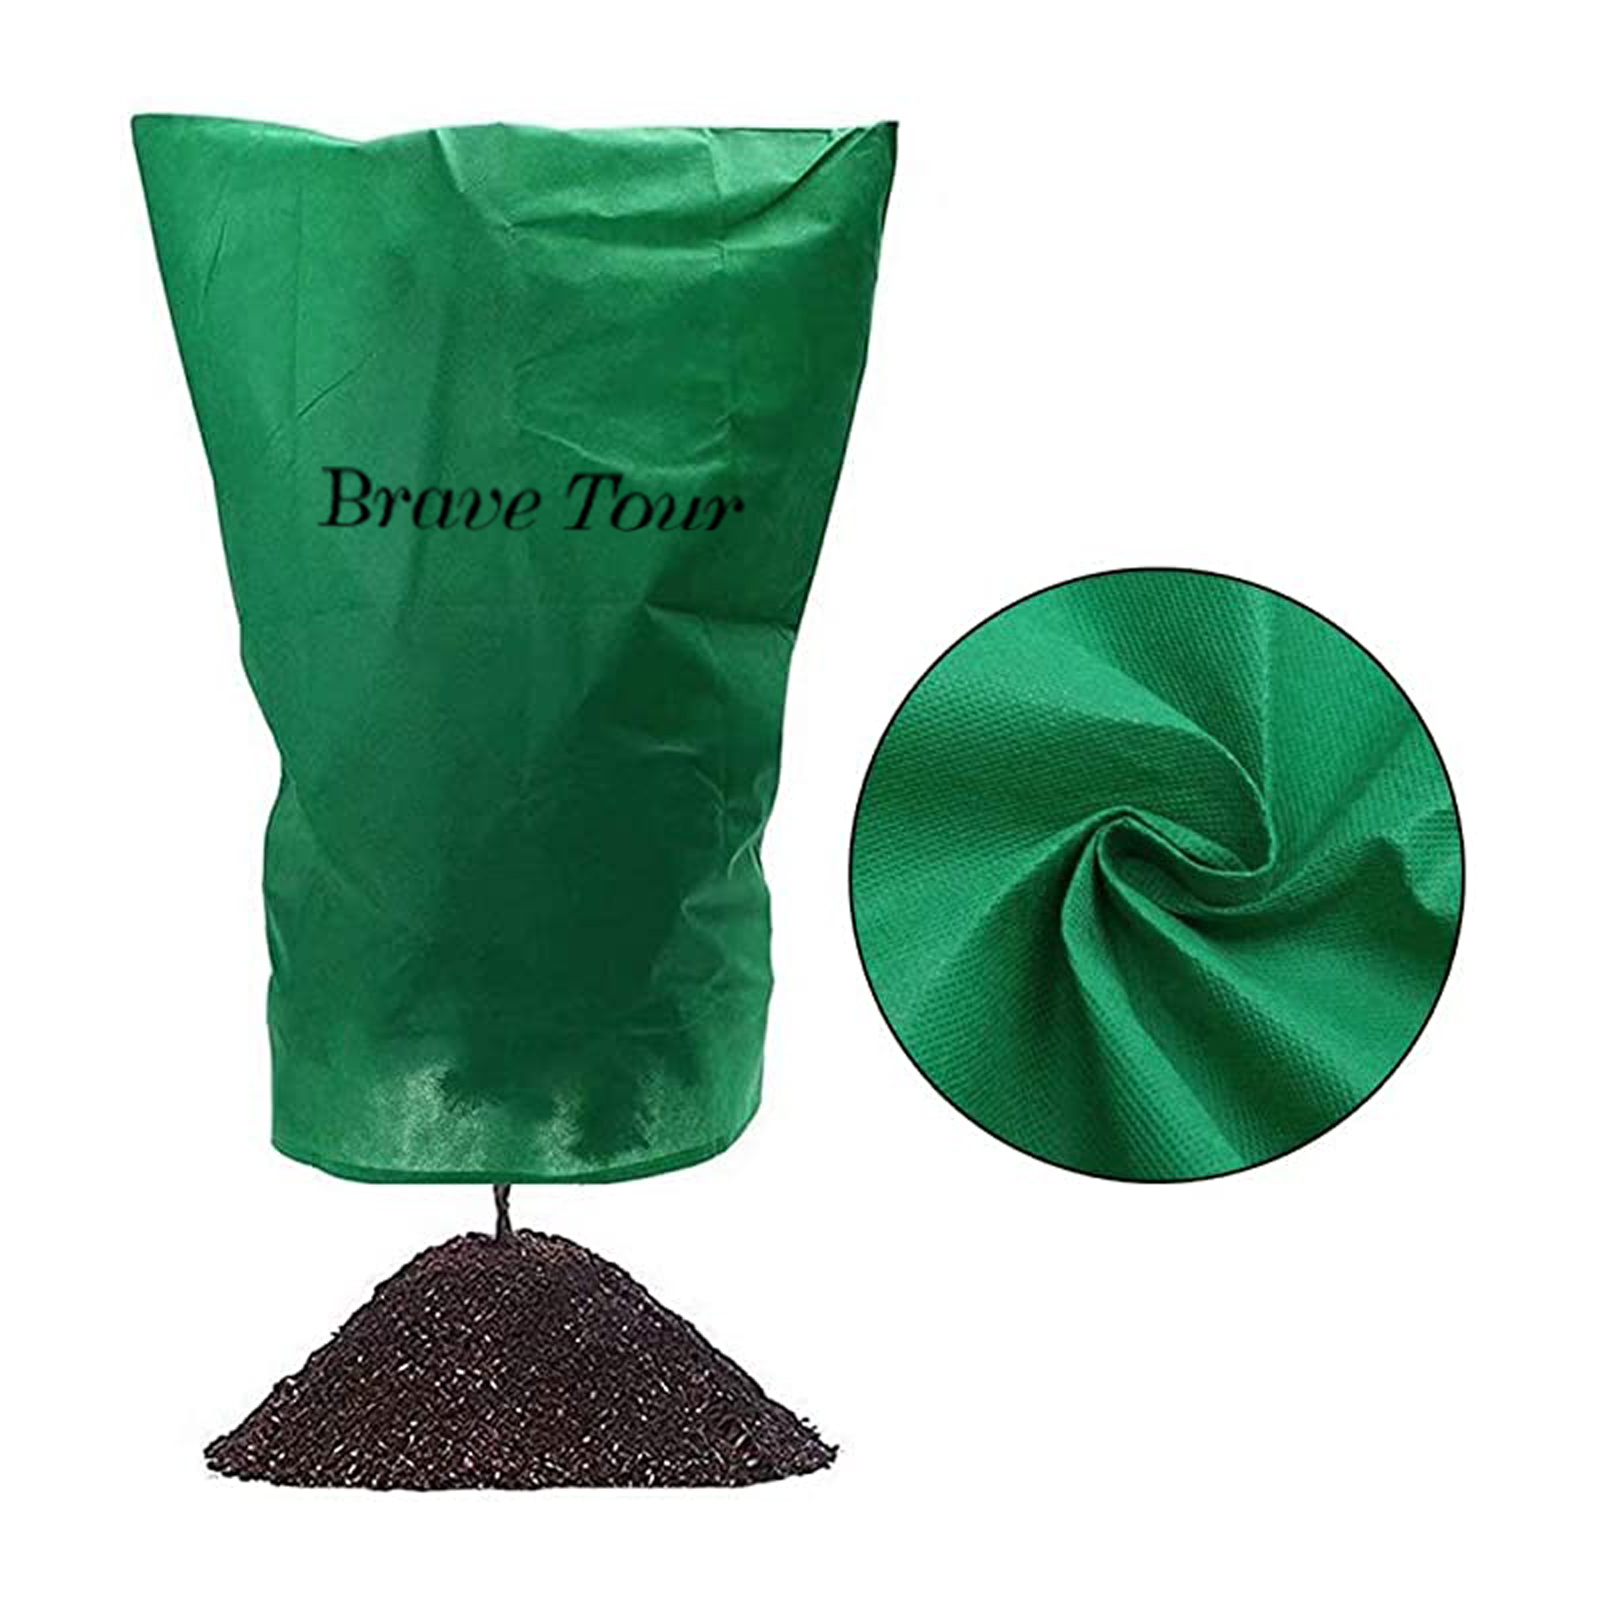 Winter Plant Frost Protection Bag Frost Cloth Blanket Protecting 24.4 x 20.5 Inch Winter Drawstring Plant Covers NZXVSE 2pcs Plant Cover Freeze Protection 